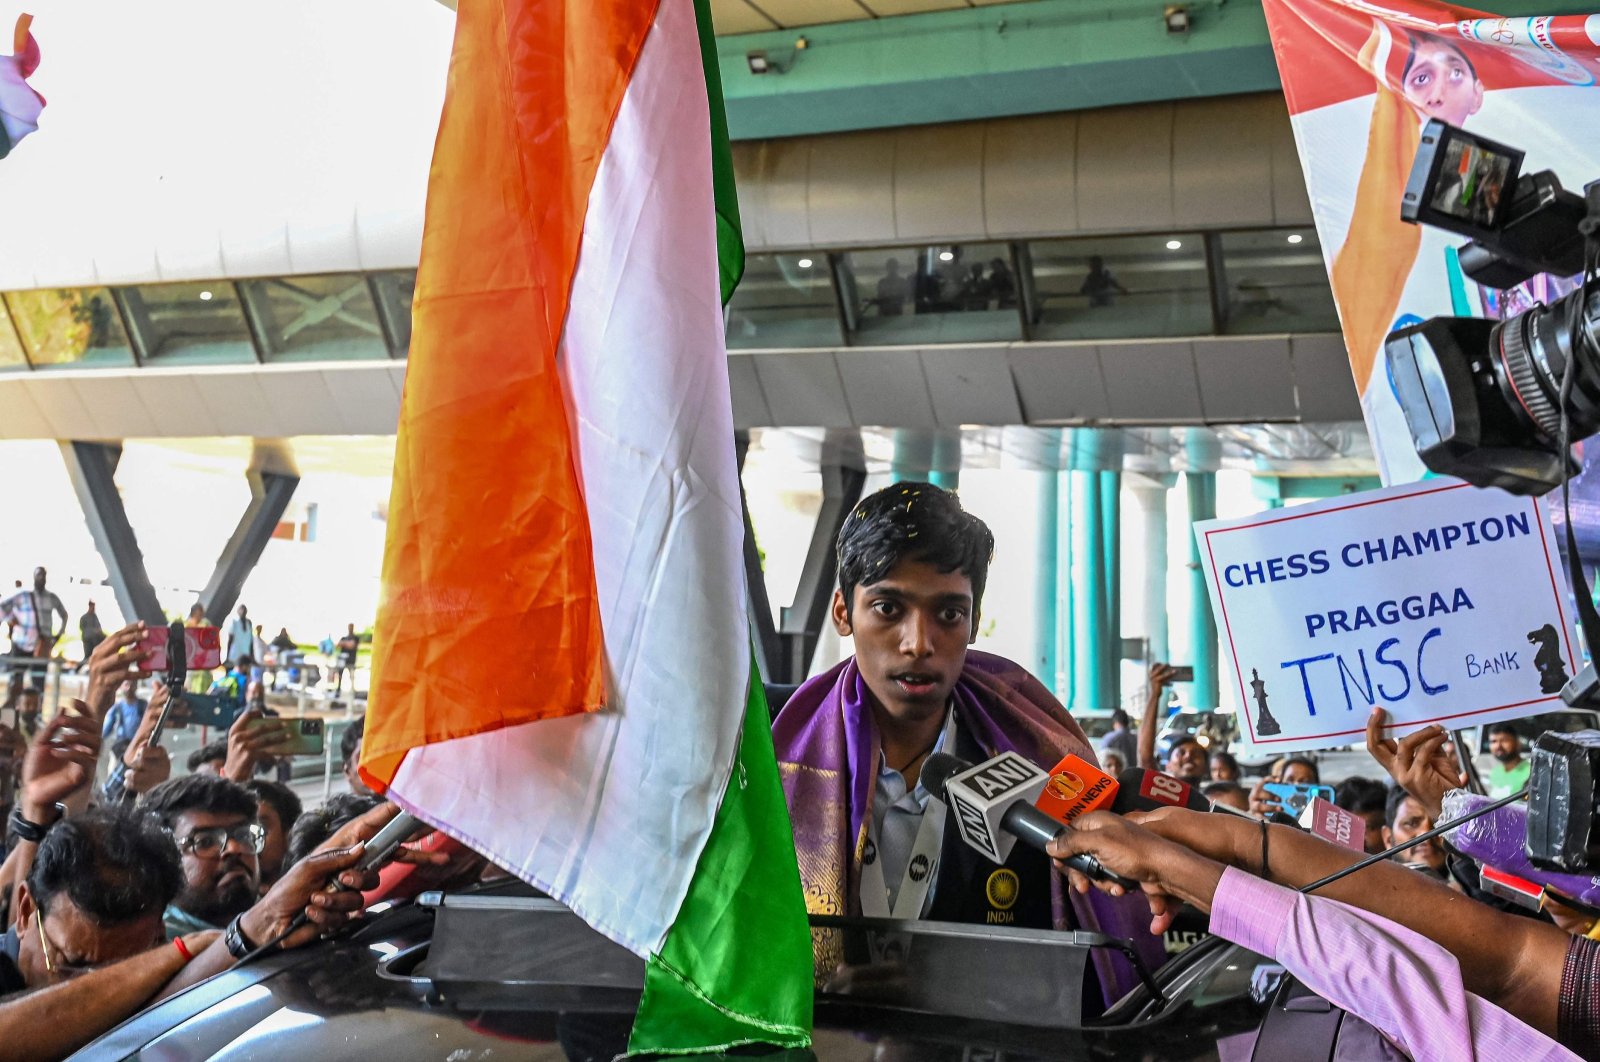 India&#039;s chess grandmaster and silver medallist Rameshbabu Praggnanandhaa, responds to a television media personnel as he is welcomed upon his return from the FIDE Chess World Cup in Baku, at the Chennai International airport, Chennai, India, Aug. 30, 2023. (AFP Photo)